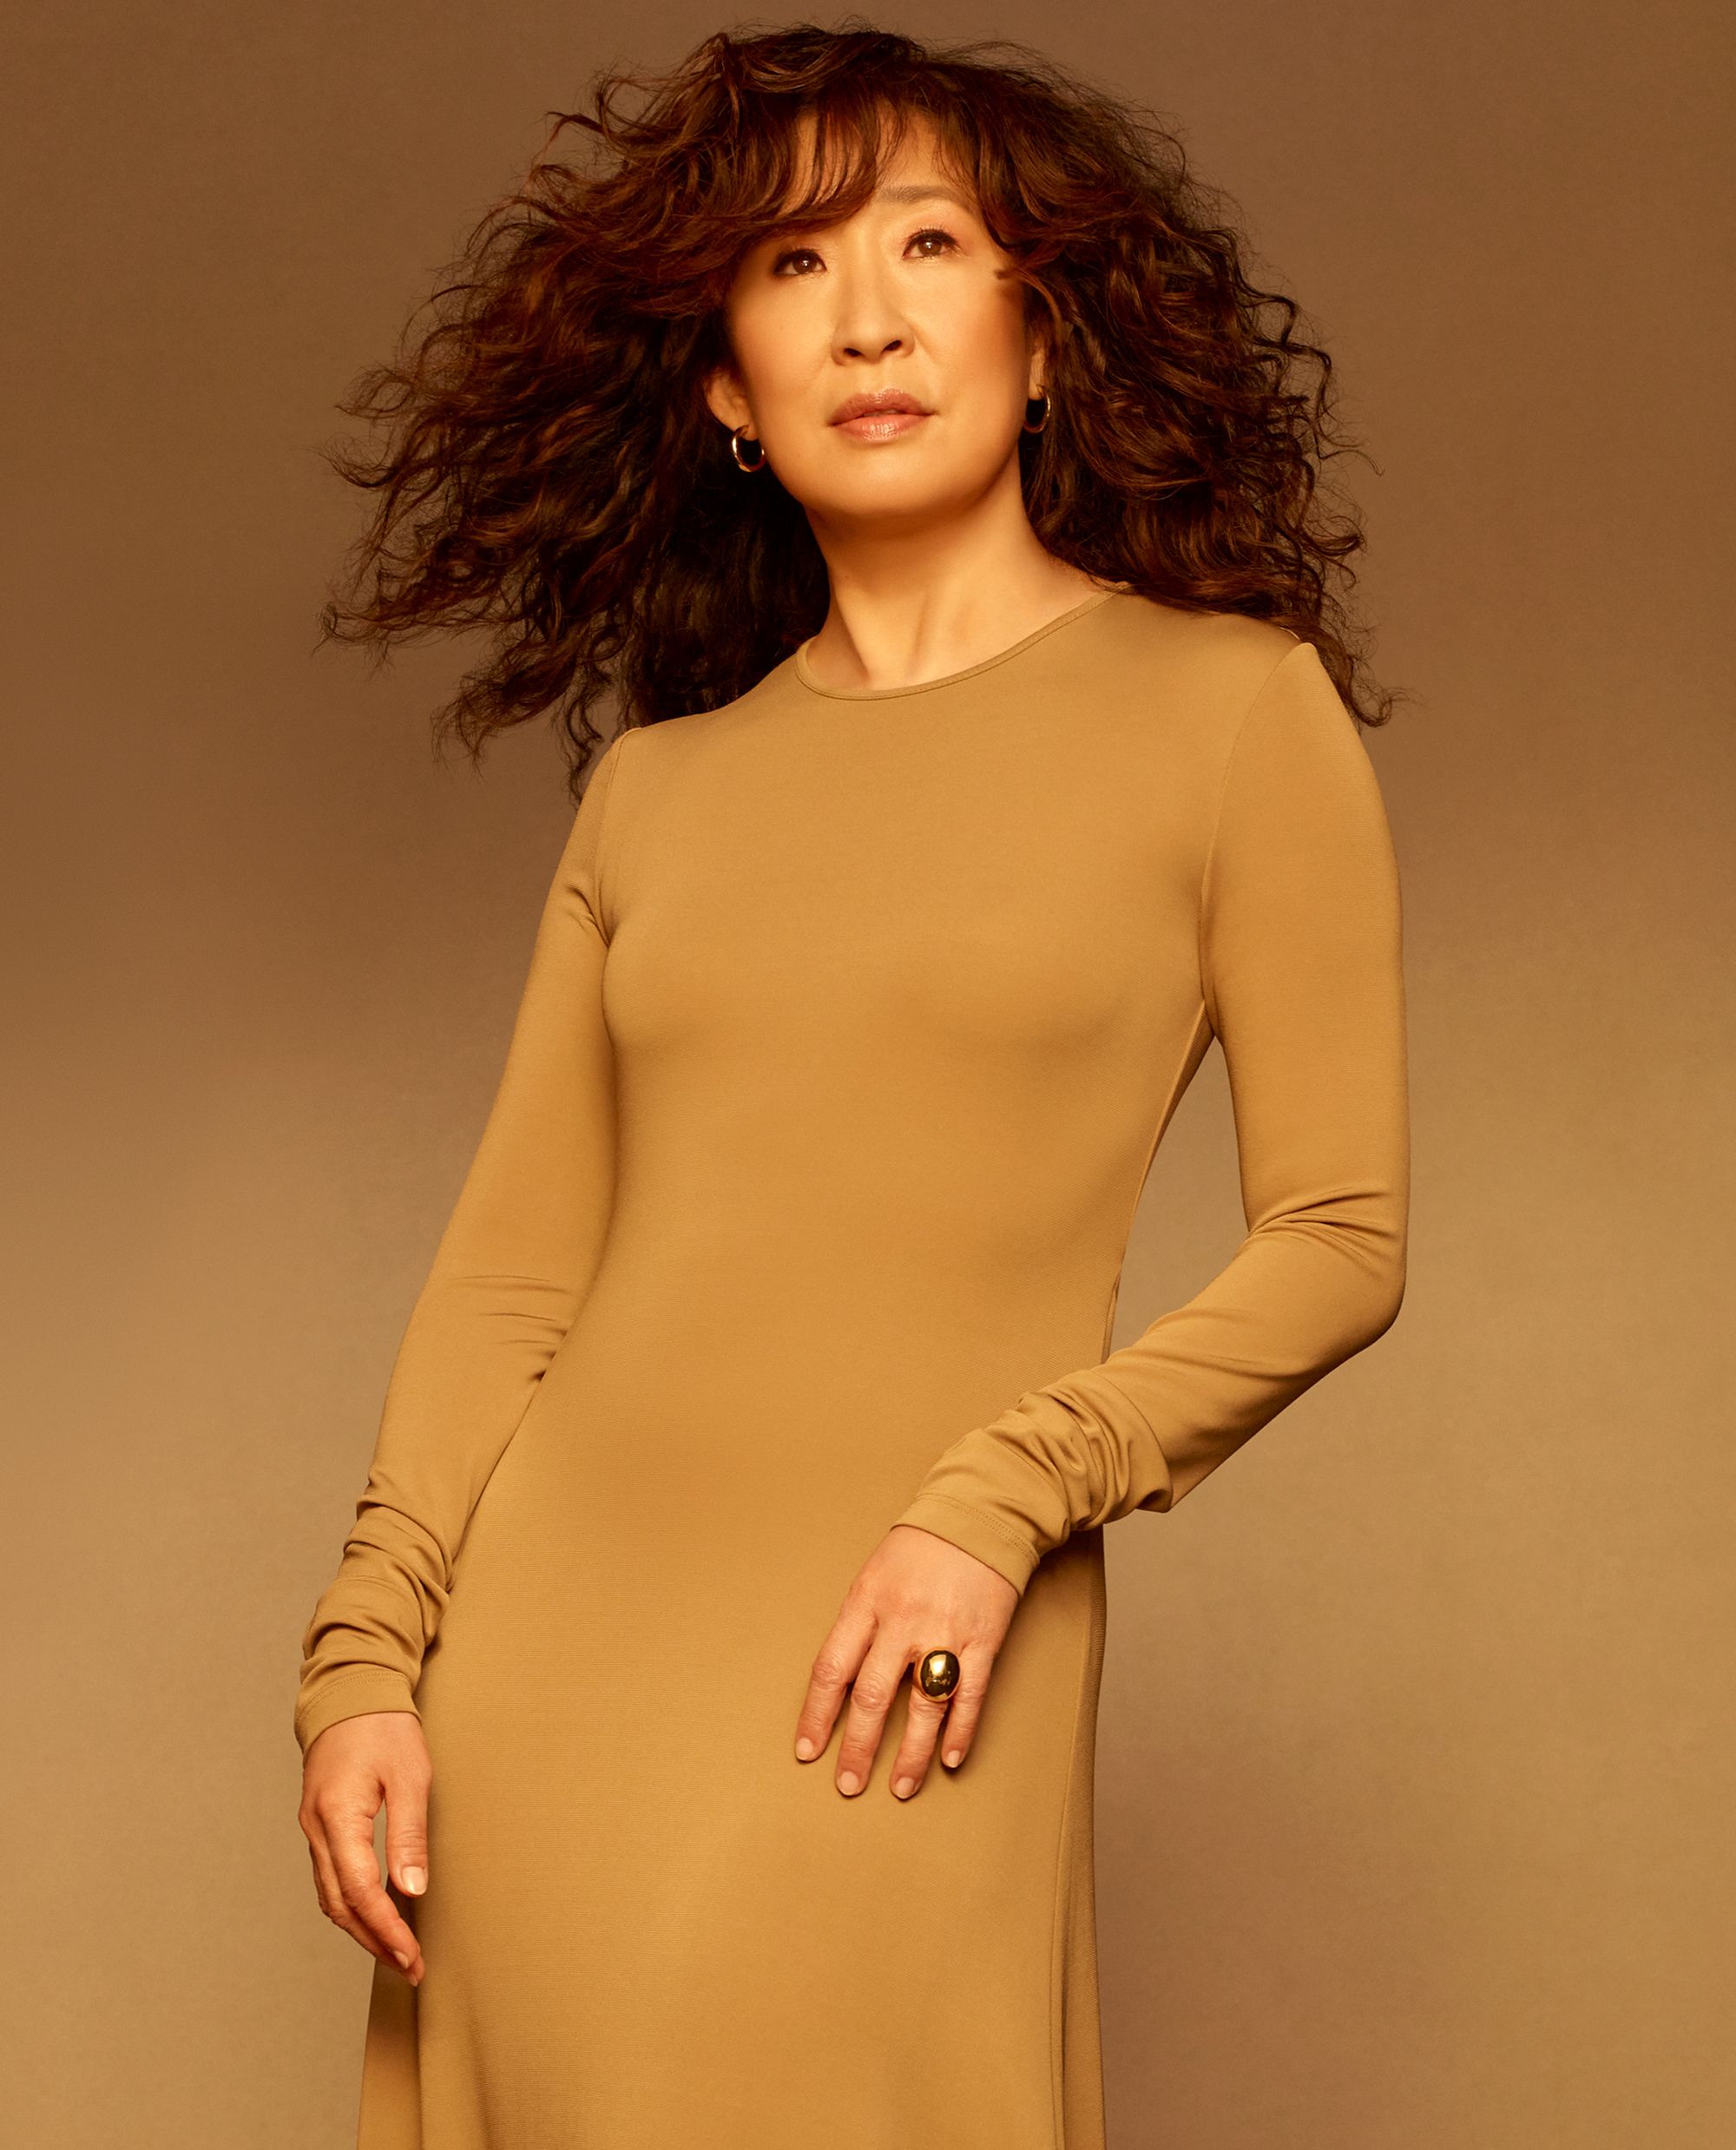 Sandra Oh Is Agitating for Real, Culture-Changing Inclusion pic